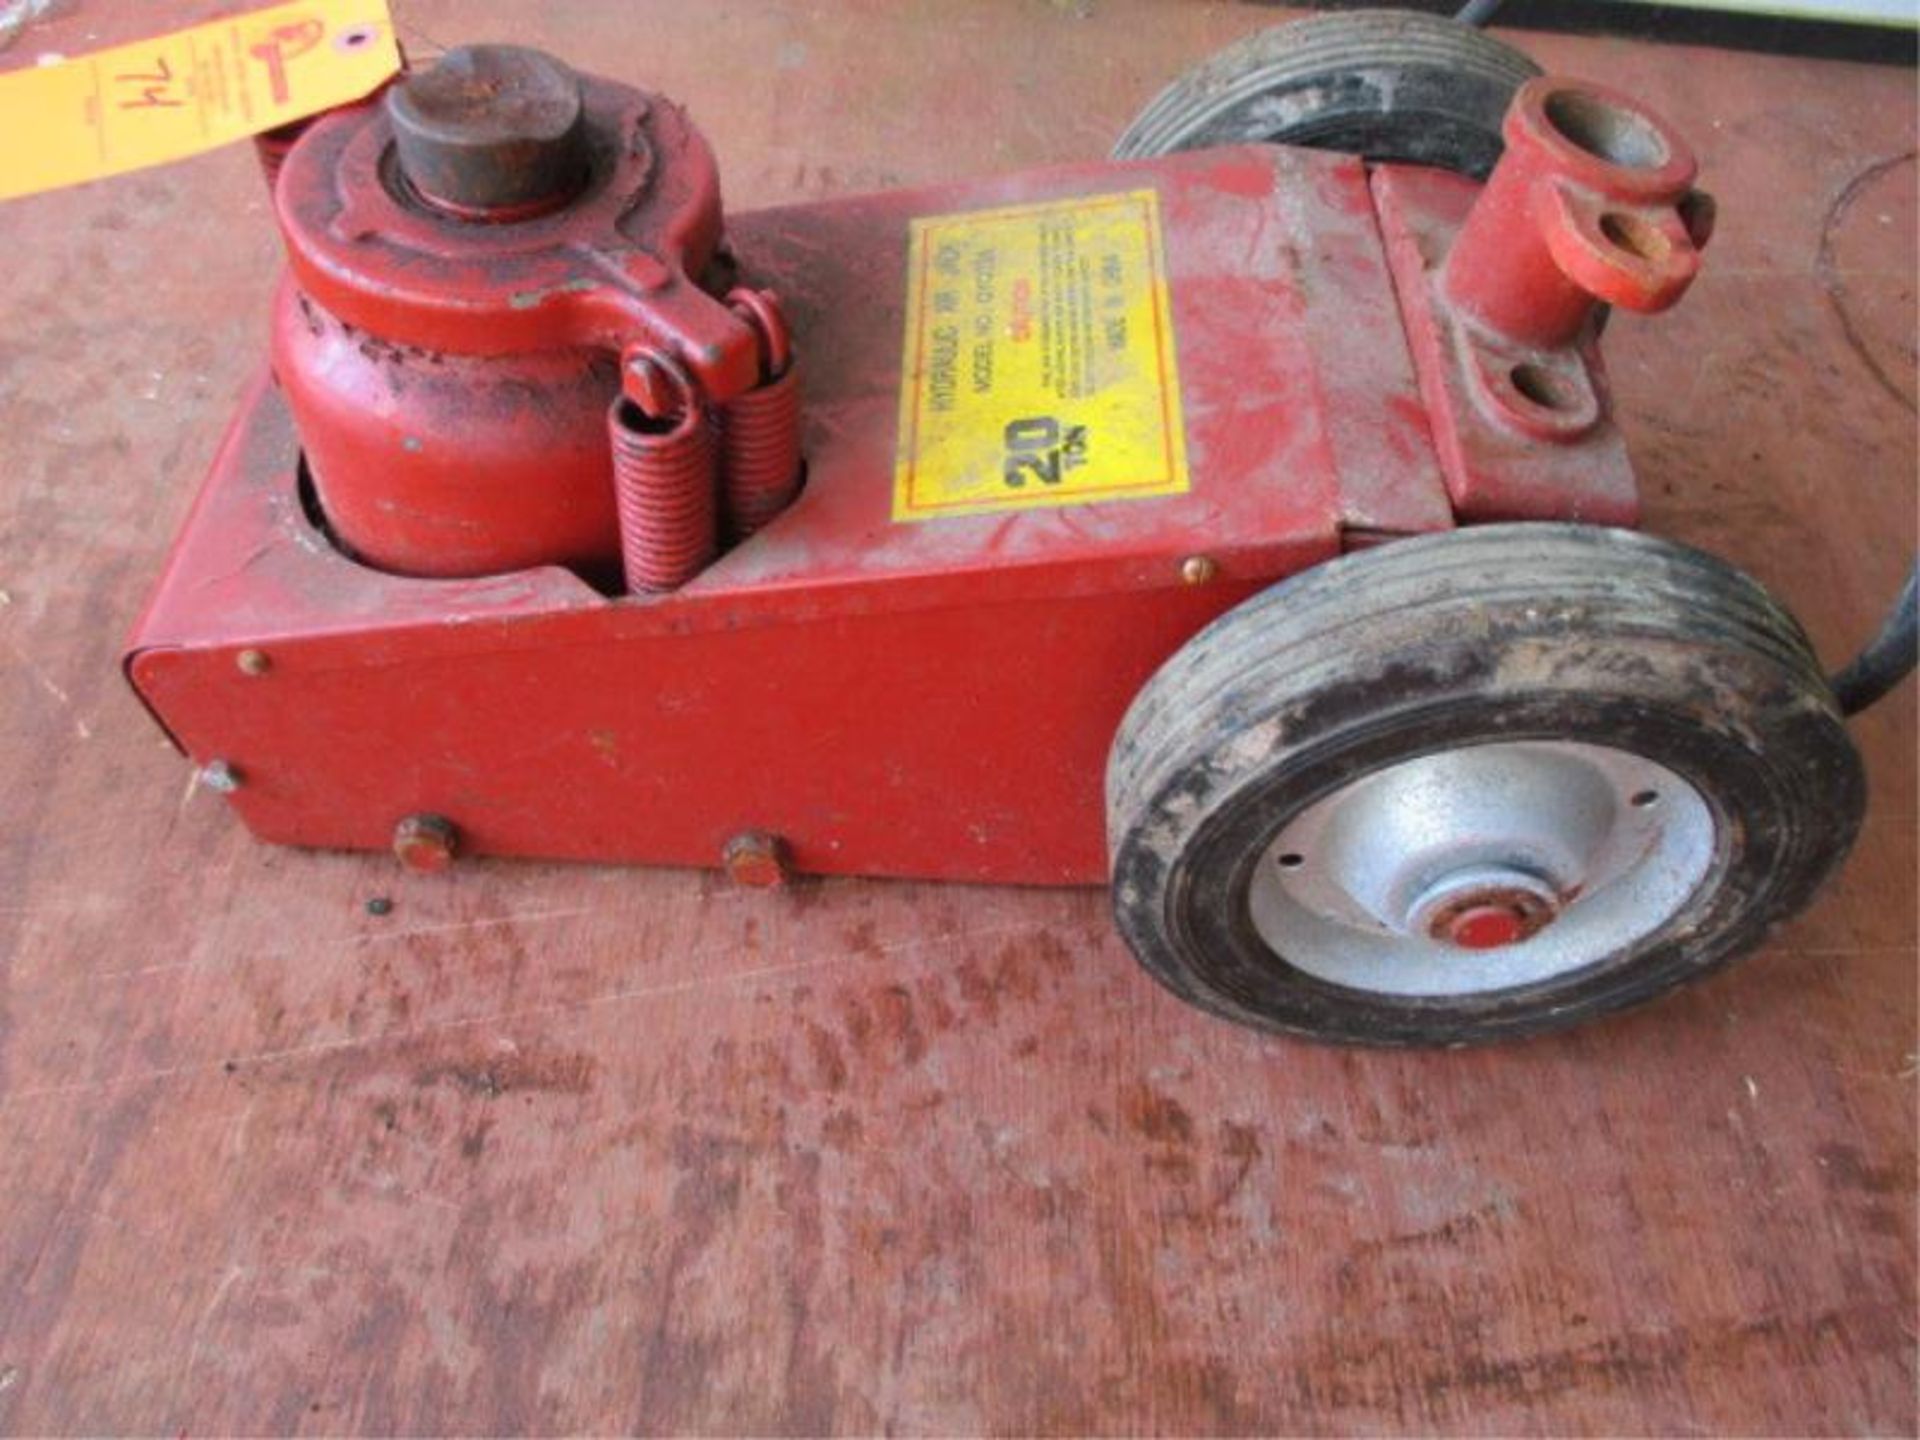 Hydraulic Air Jack, Model: QYQ20A, 20 Ton, Missing Handle Missing Handle - Image 8 of 13